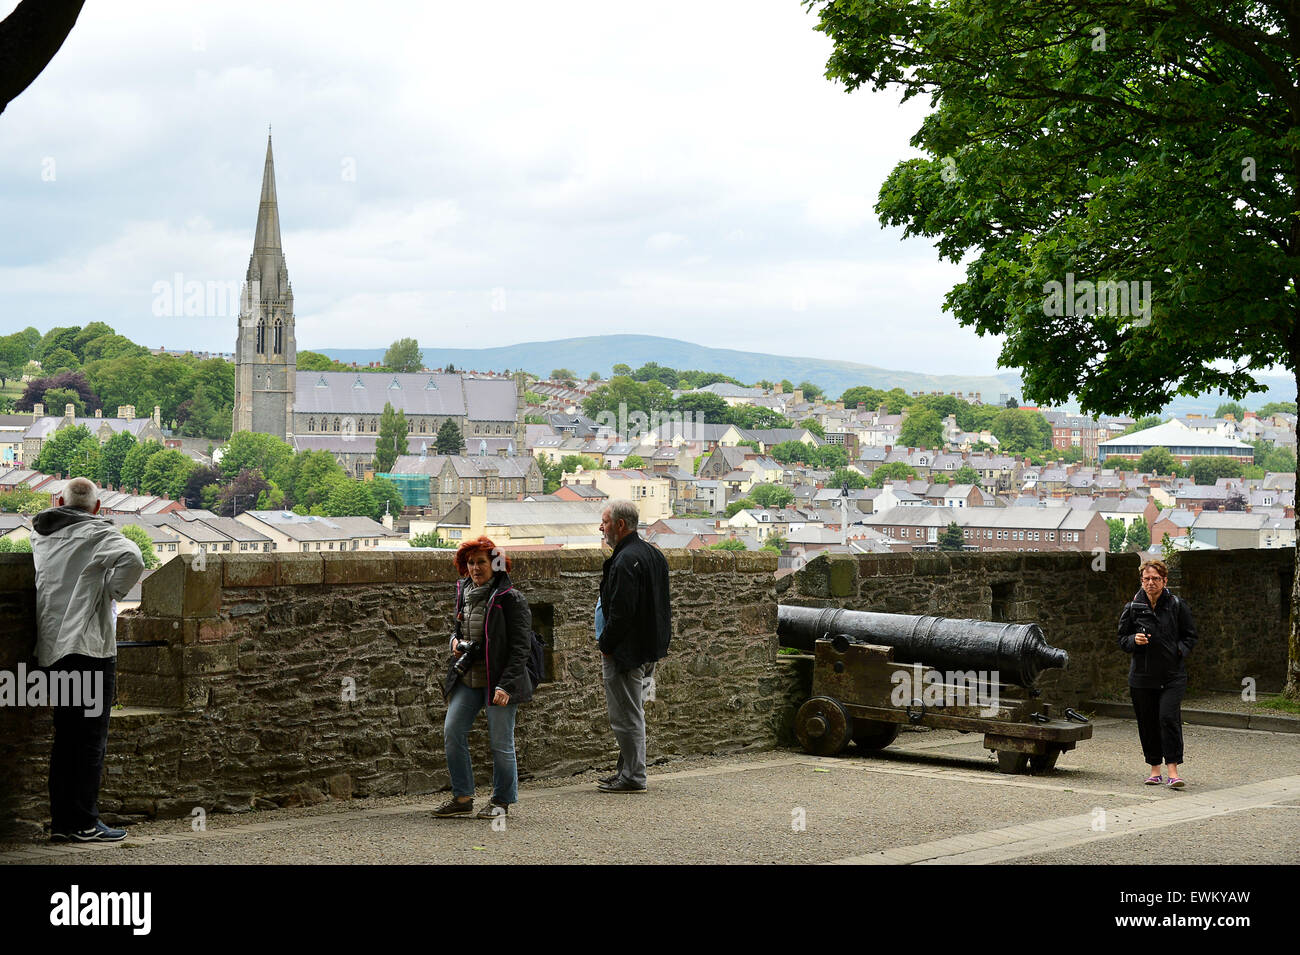 Tourists walk on the 17th century Derry Walls in Londonderry, Northern Ireland. Stock Photo